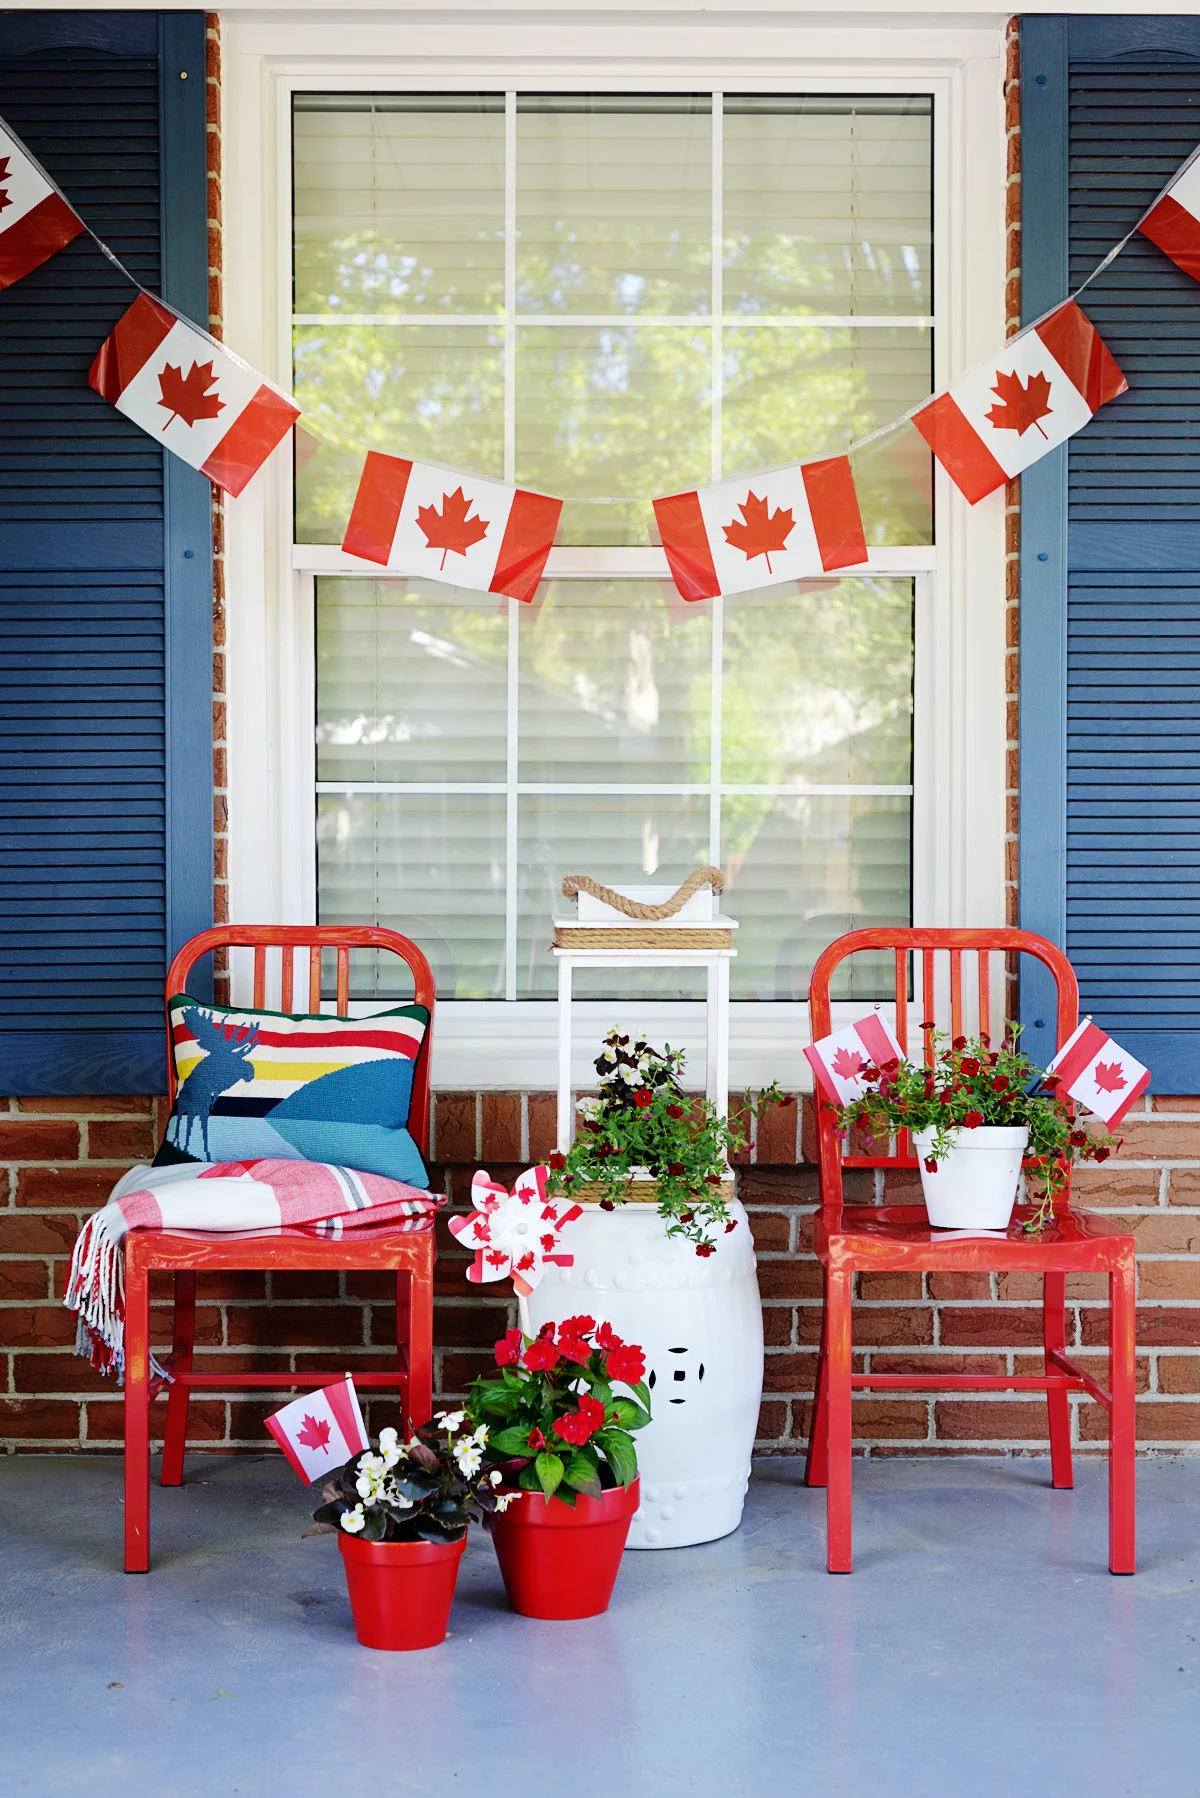 Canada Day porch decor with red metal chairs, plants, and flag bunting